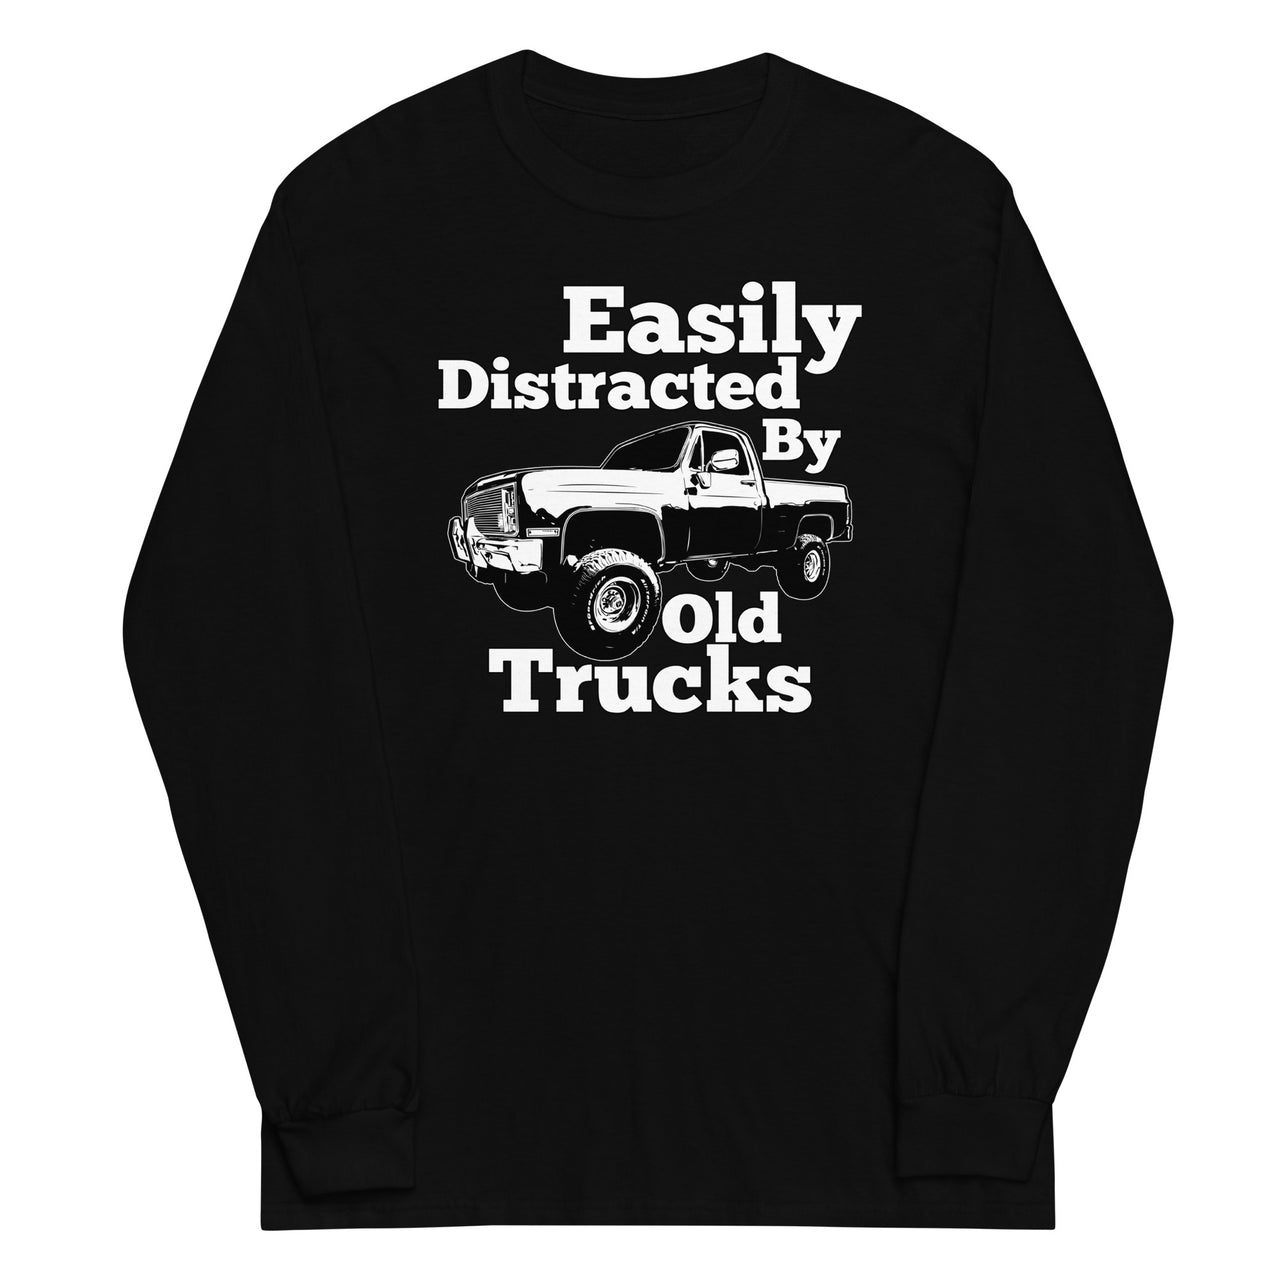 Black Square Body Truck Long Sleeve Shirt - Easily Distracted By Old Trucks